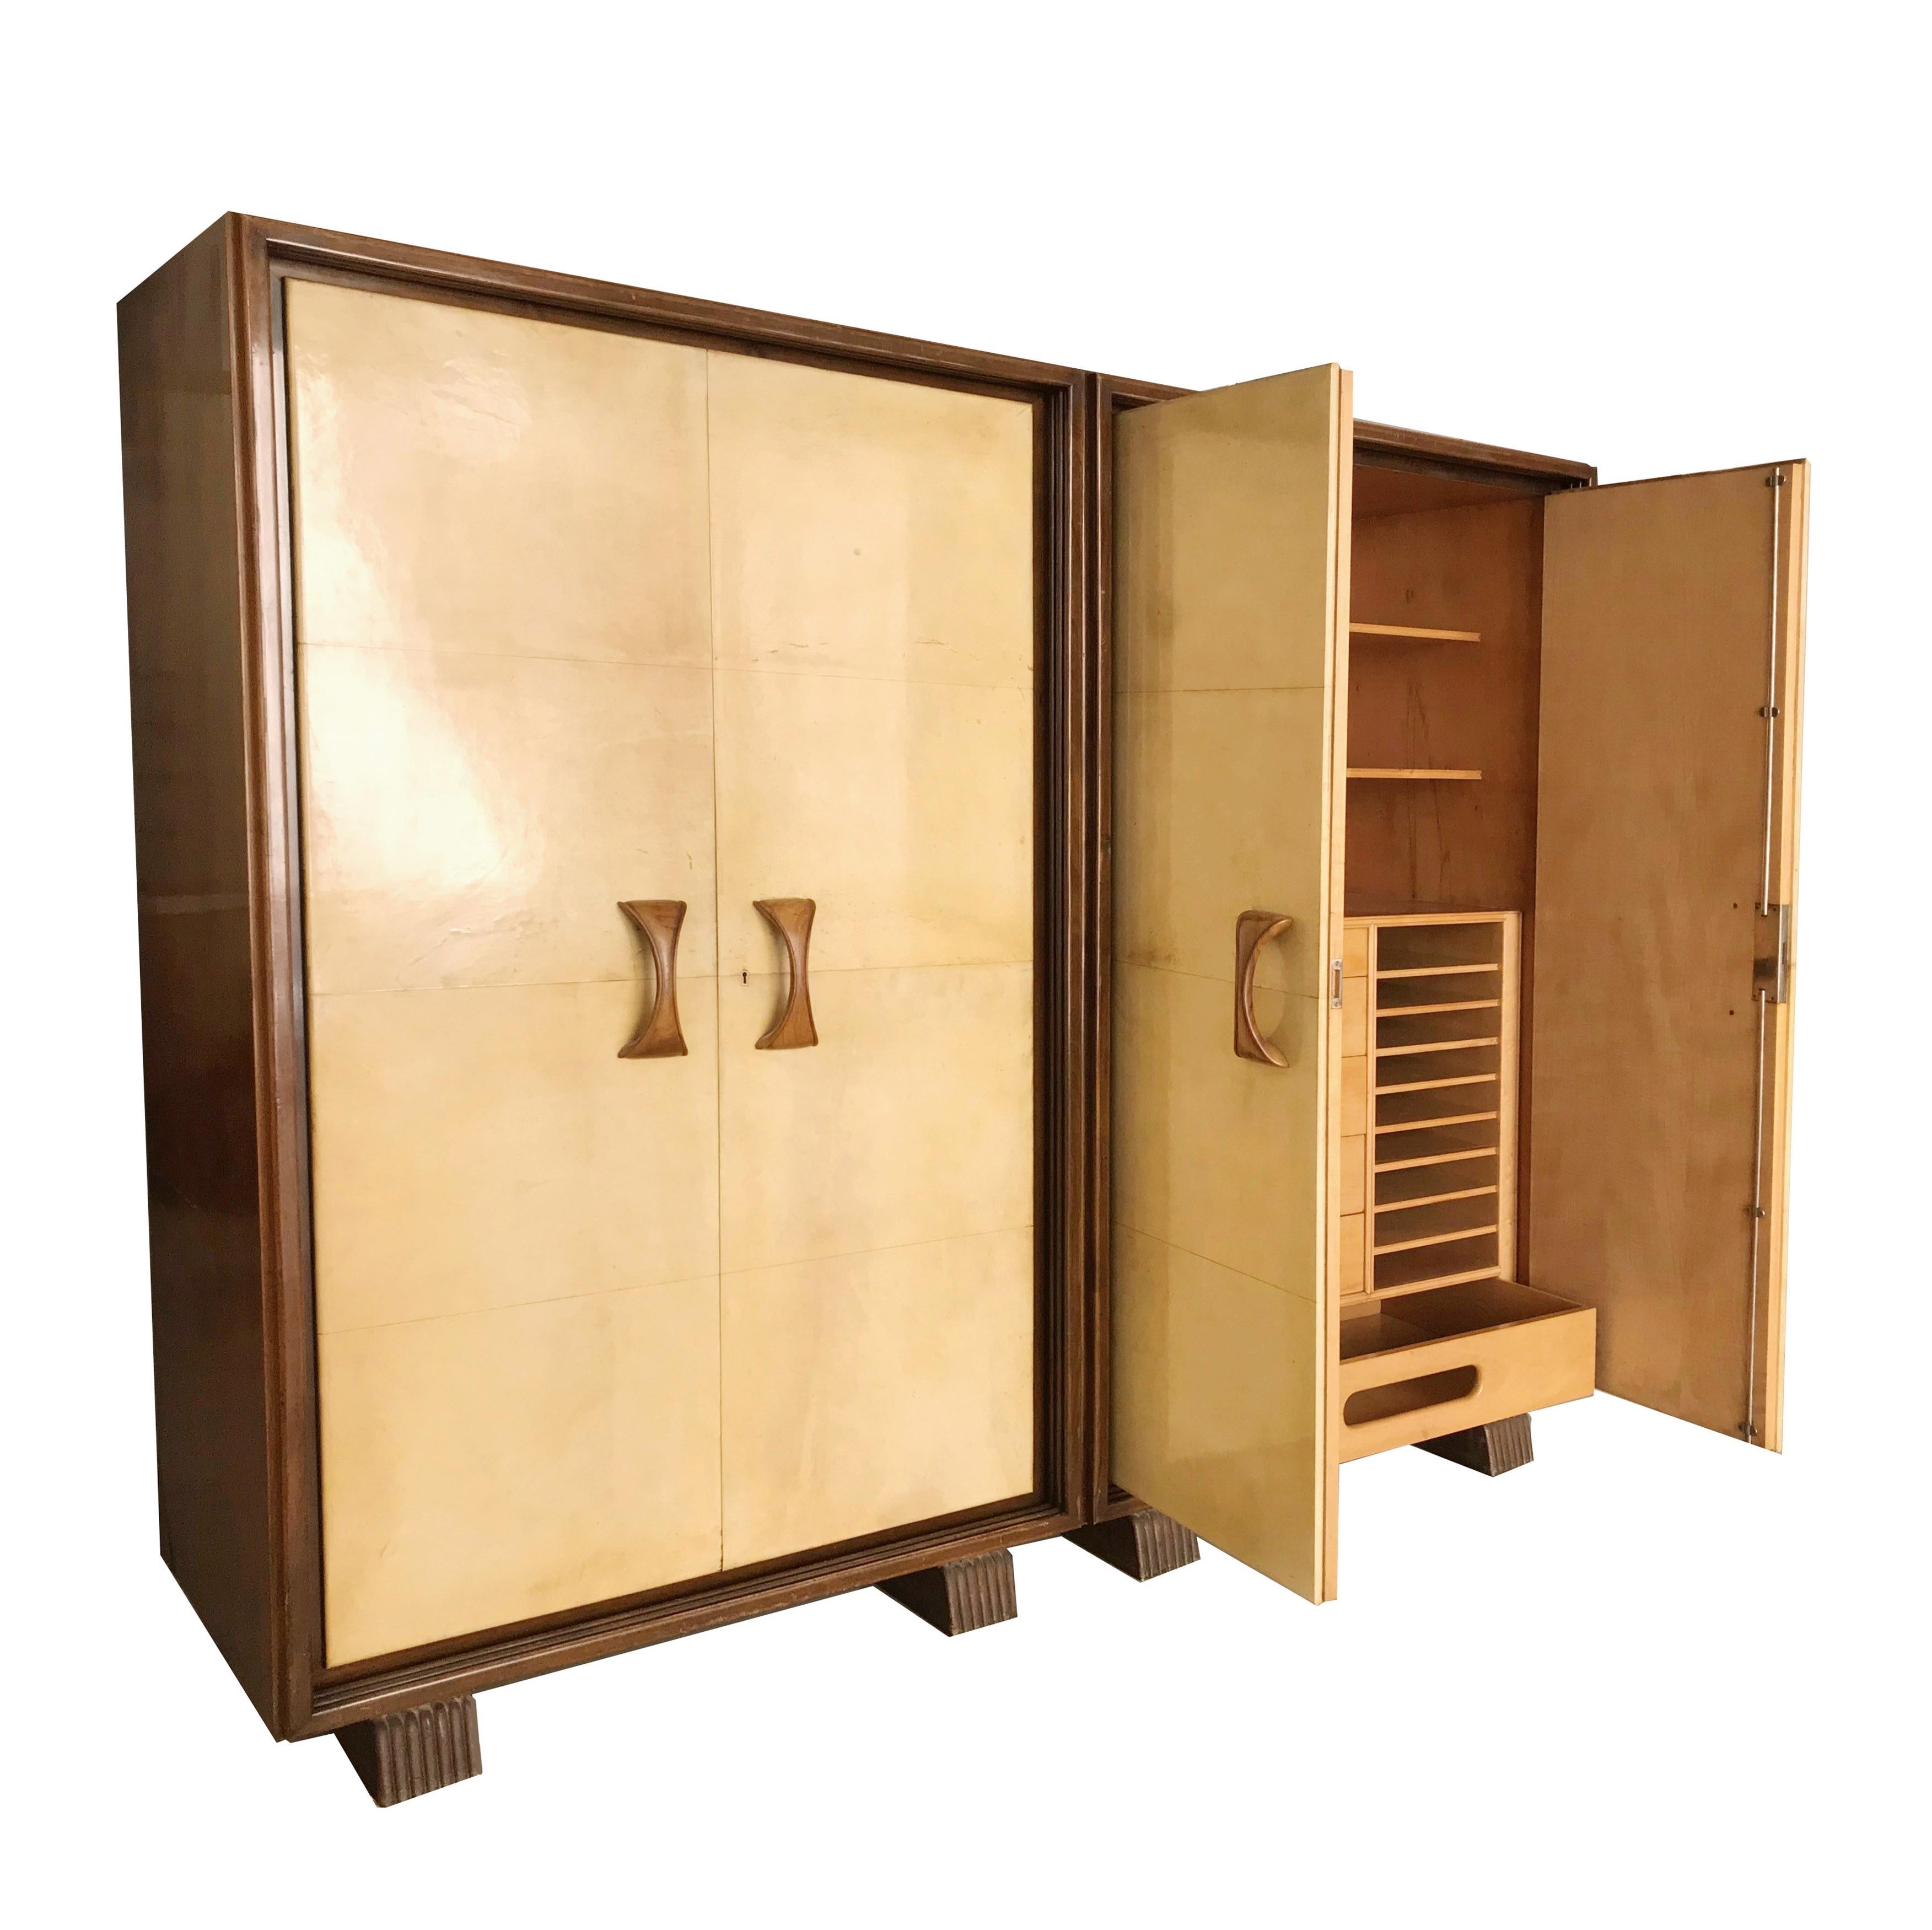 Beautiful wardrobe/cabinet made and signed by Valzania, covered in parchment. A masterpiece of other times, executed by Maestro Valzania. Attributable to Guglielmo Ulrich as a line. The four door wardrobe covered in parchment and with four handles